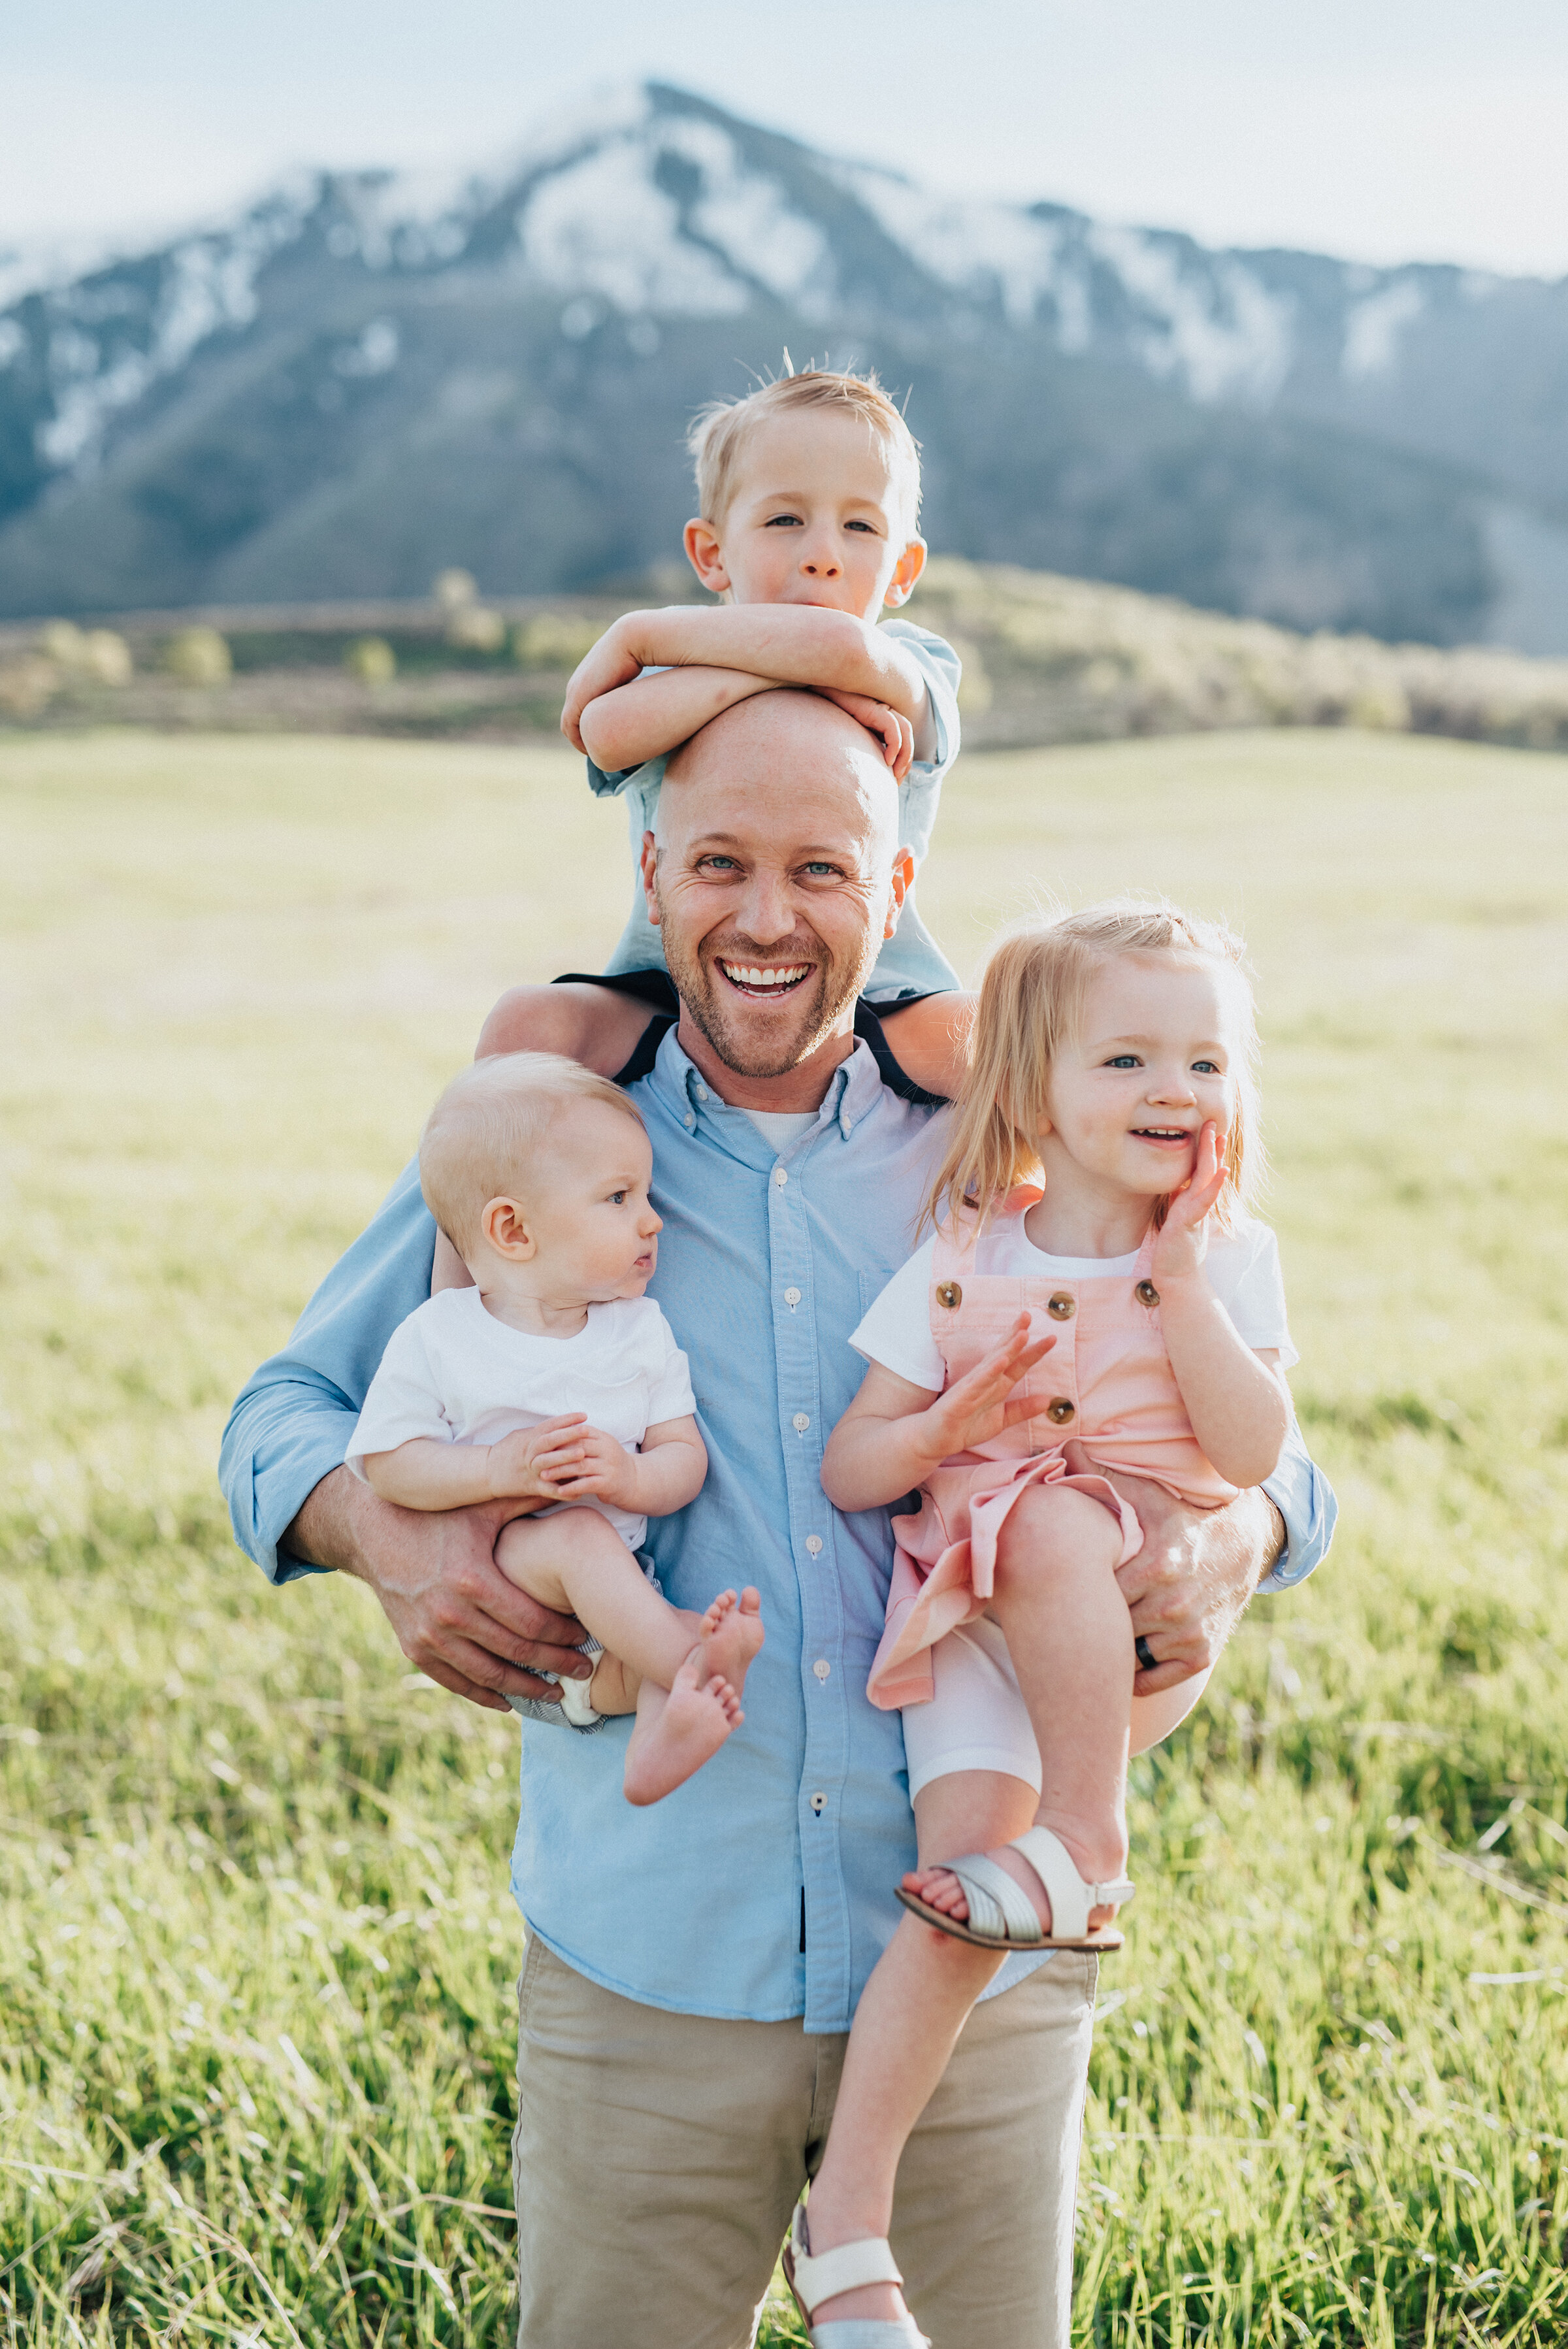  Dad holds all three of his children during a wellsville utah family photoshoot. Daddy smiles with all children family memories young family pose ideas mountain family photos utah photographer cache valley photography #wellsvilleut family photo inspiration #daddysgirl #daddyslittlegirl #daddysboy #daddyanddaughter #daddyandson #portraitsession #portraitphotography #mountainsession #familysession 